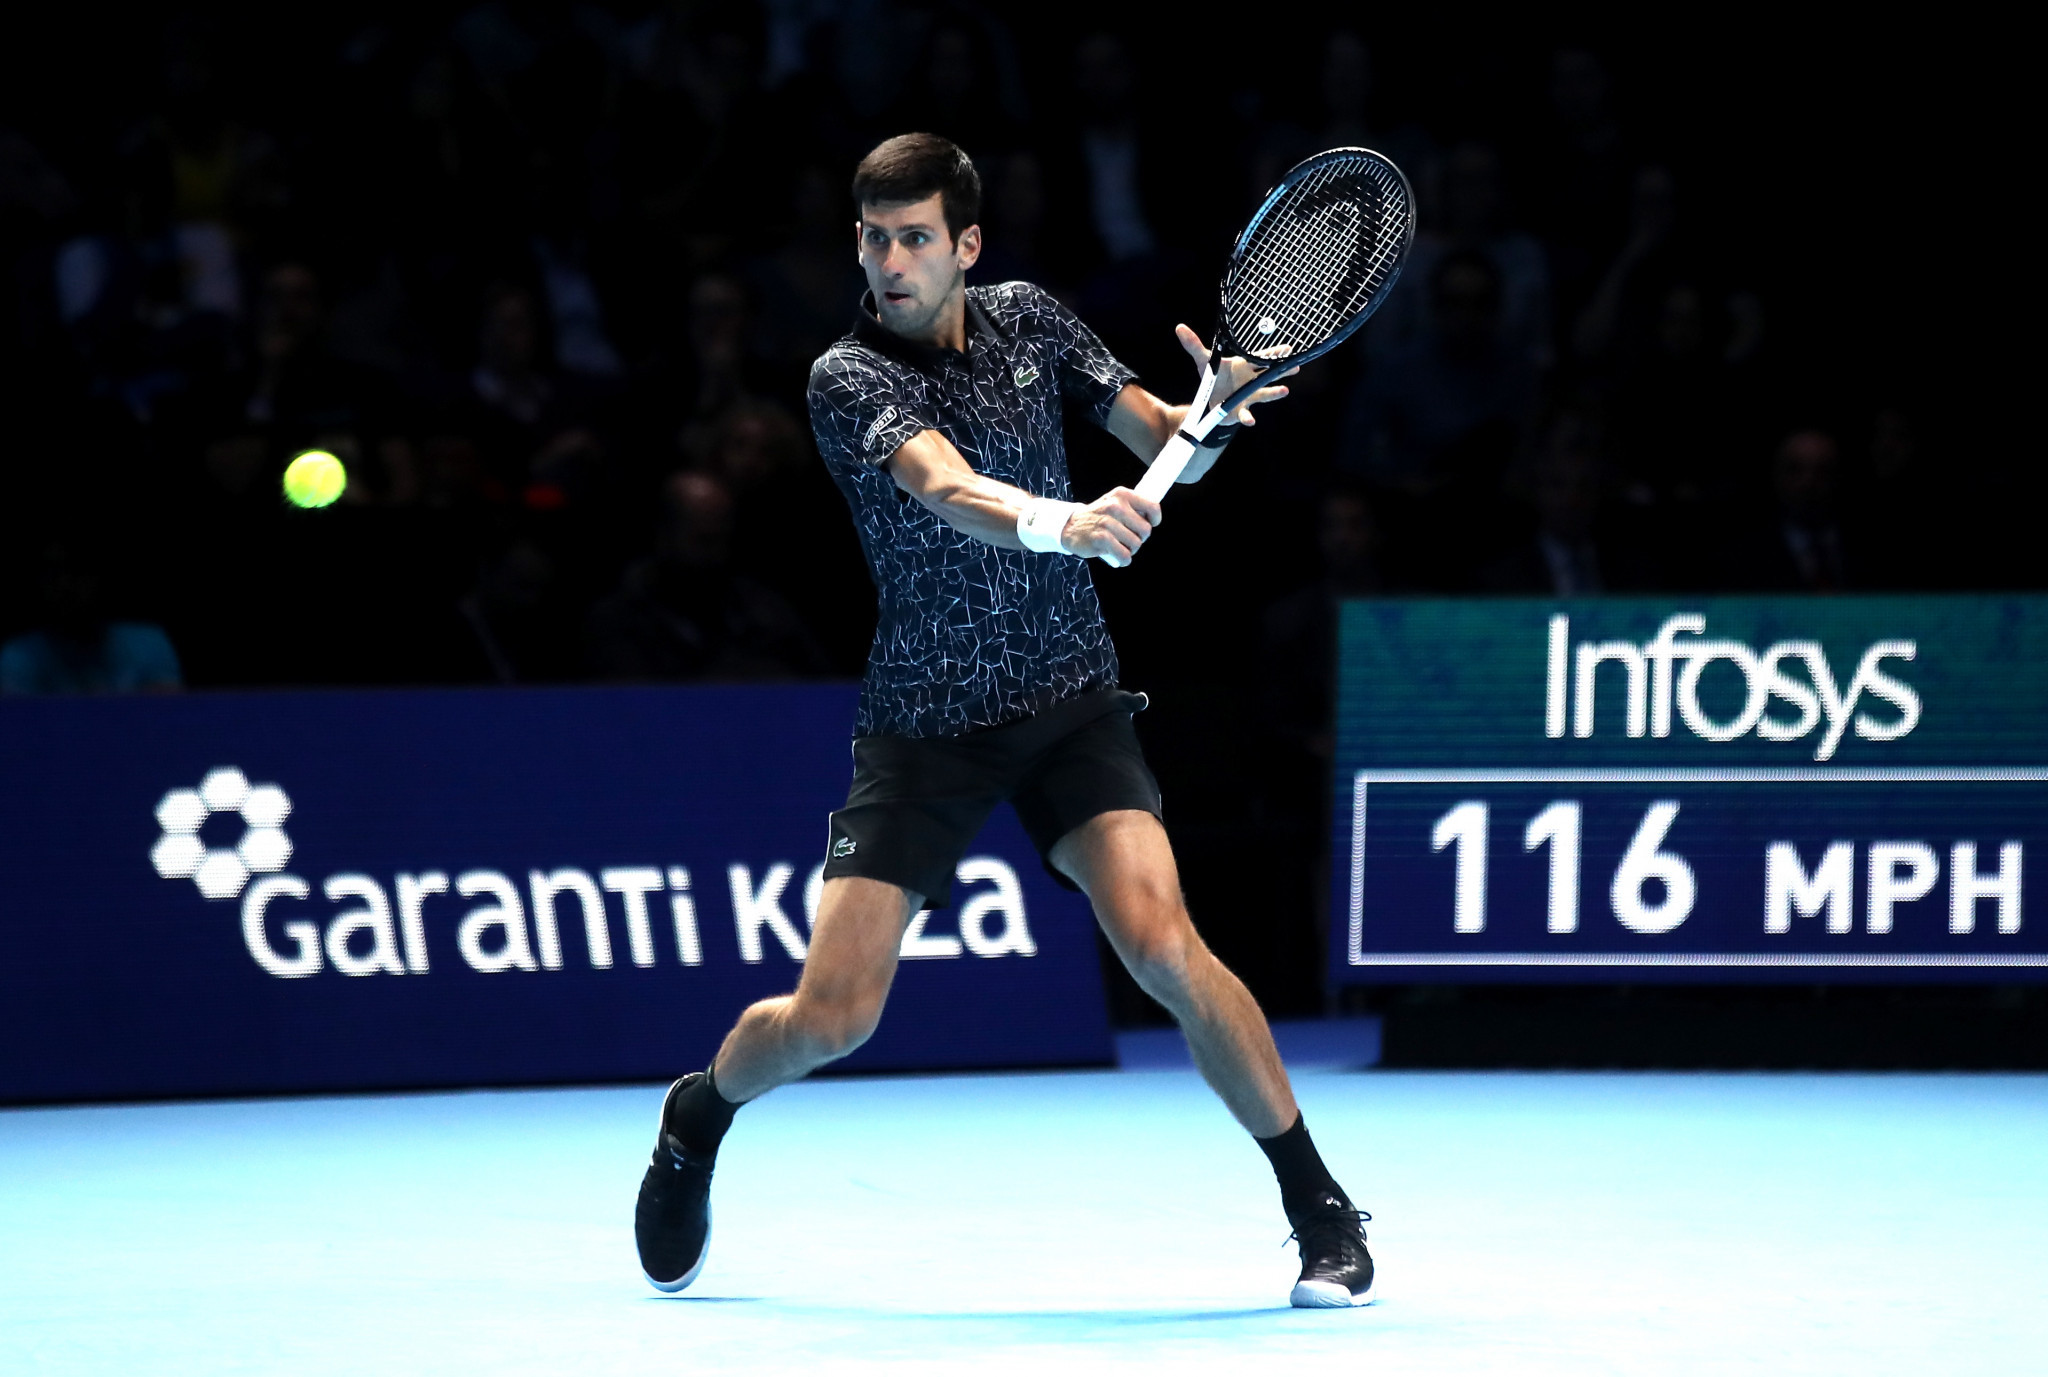 Djokovic walks tall against Isner in his opening ATP Finals group match